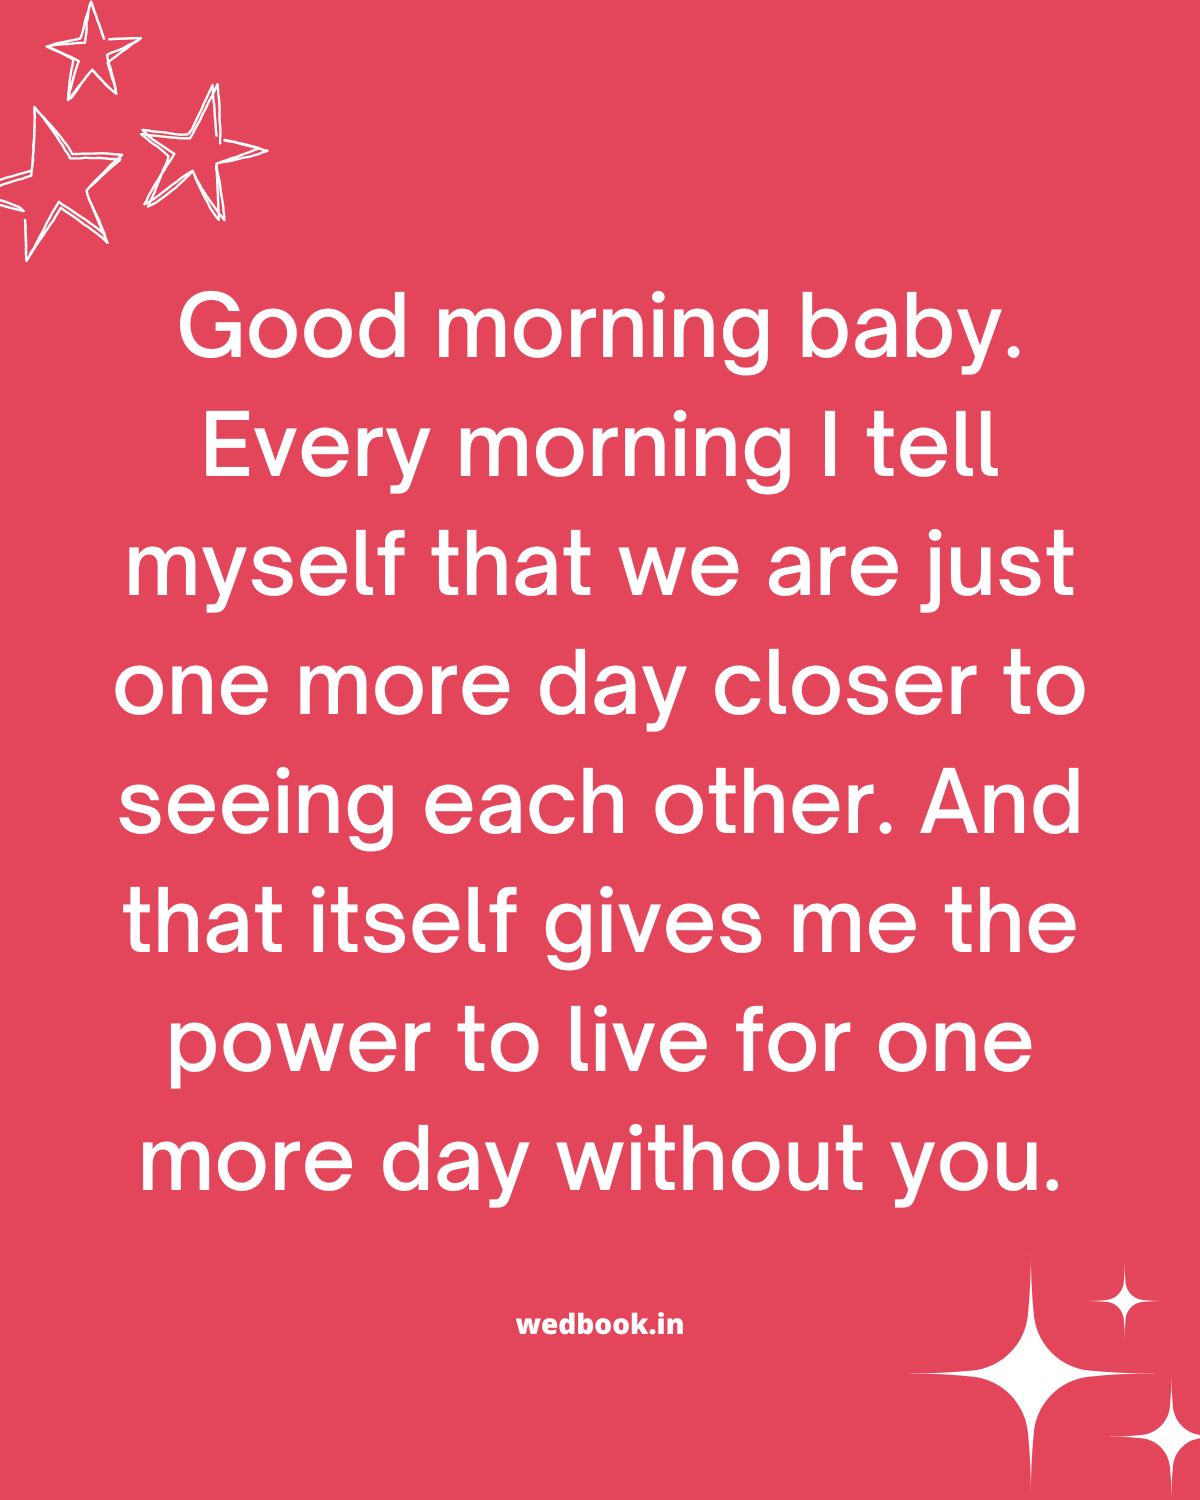 151 Good Morning Paragraphs For Her - Wedbook